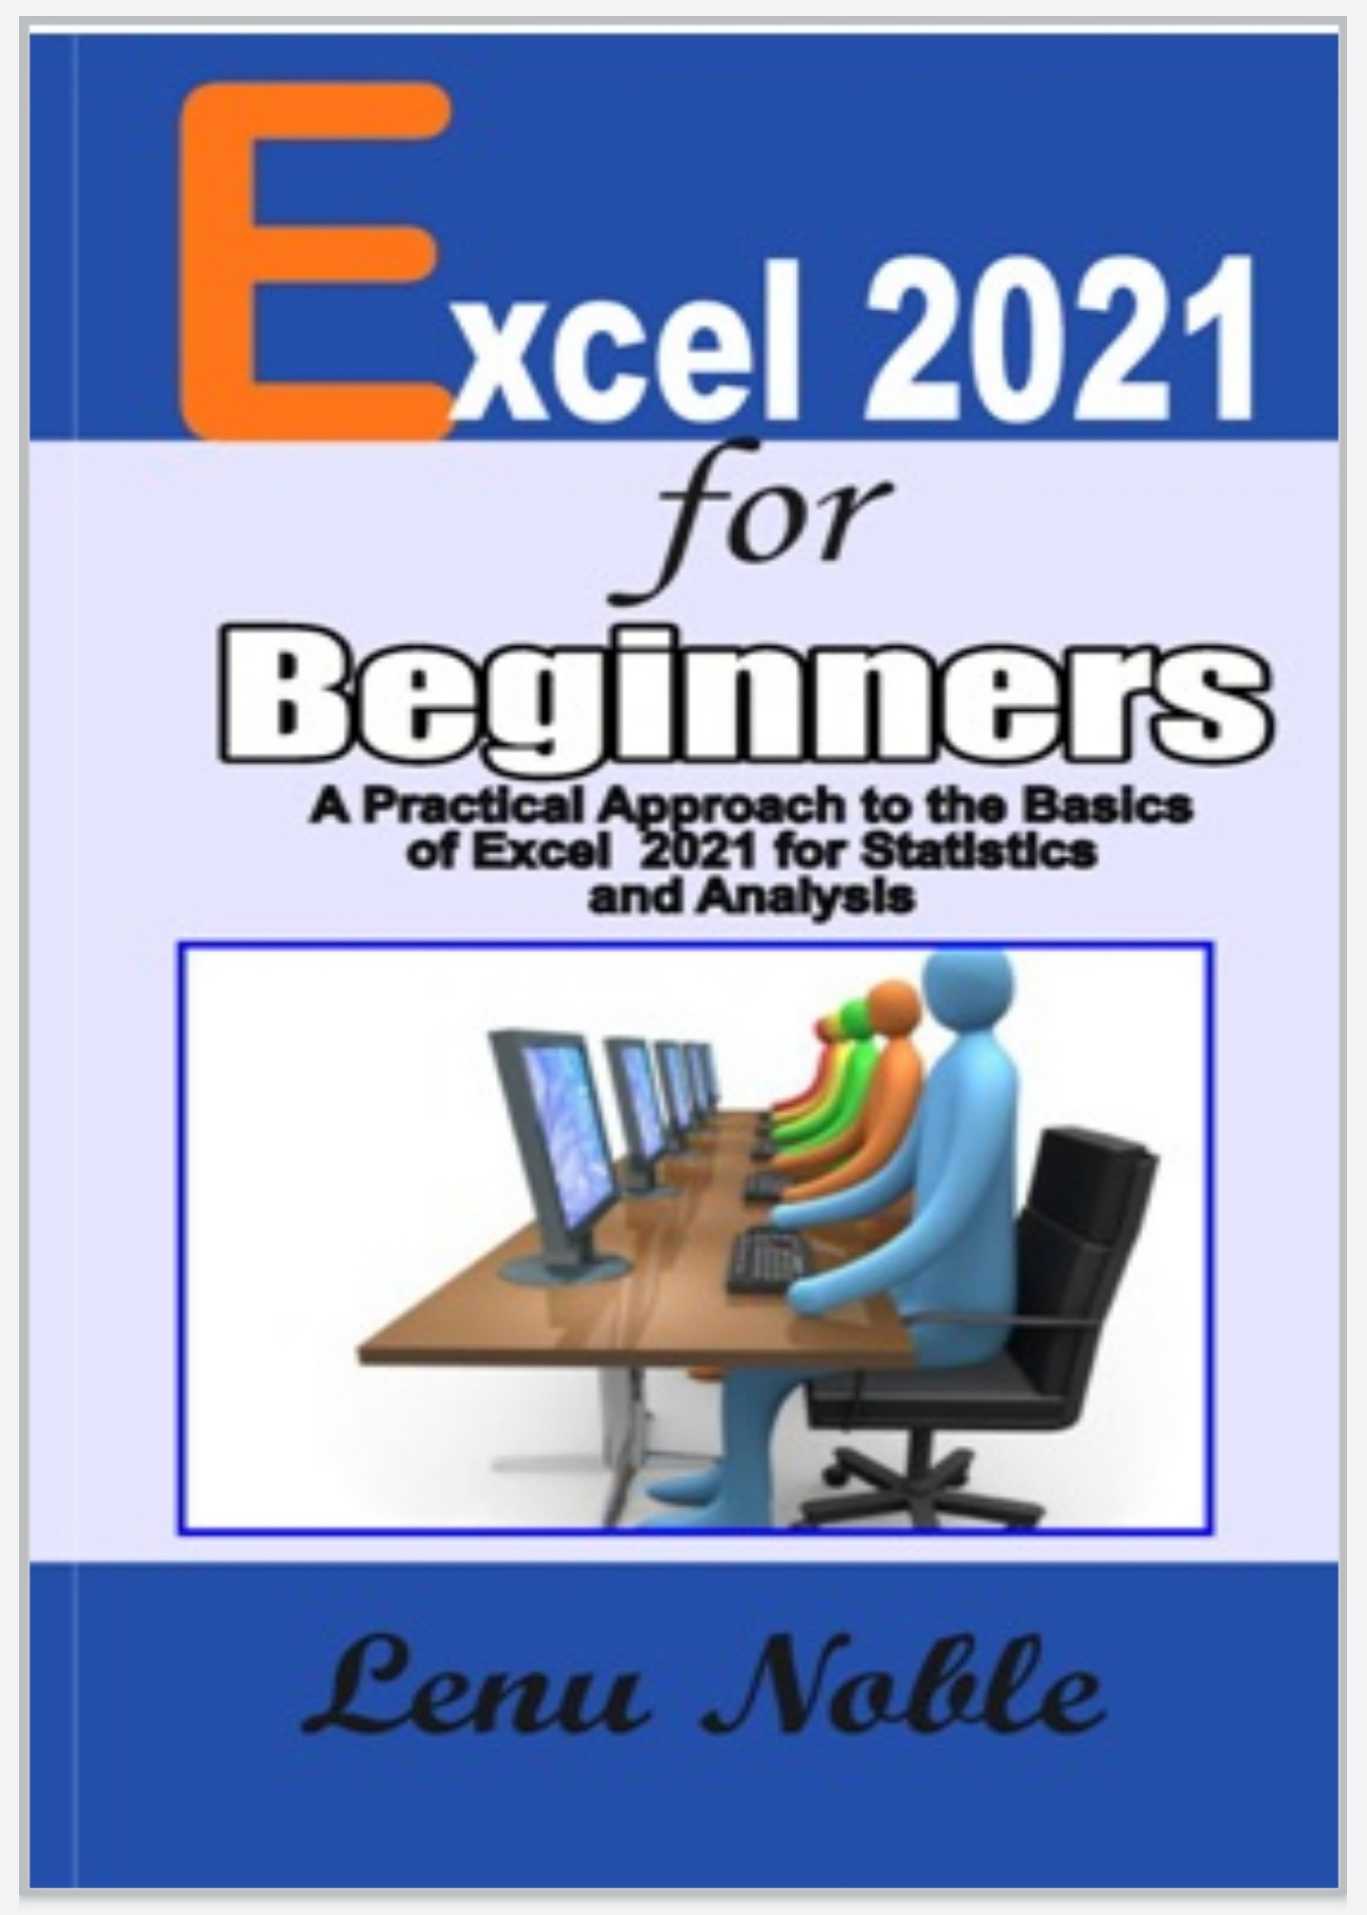 Excel 2021 For Beginners: A Practical Approach To The Basics Of Excel 2021 For Statistics And Analysis